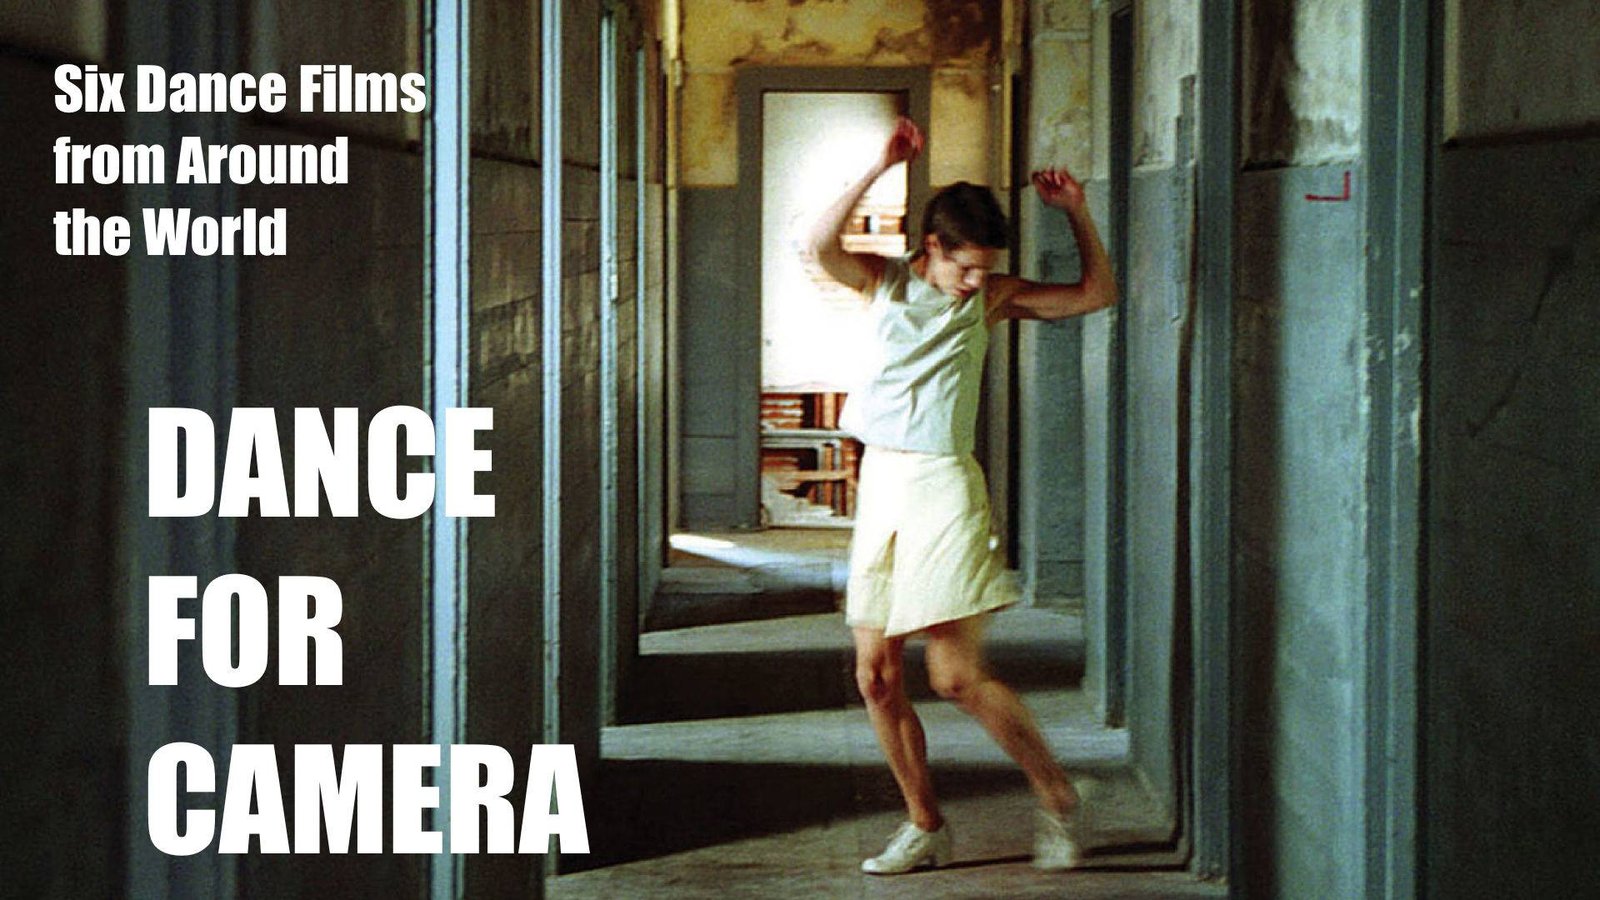 Dance for Camera - Six Dance Films from Around the World